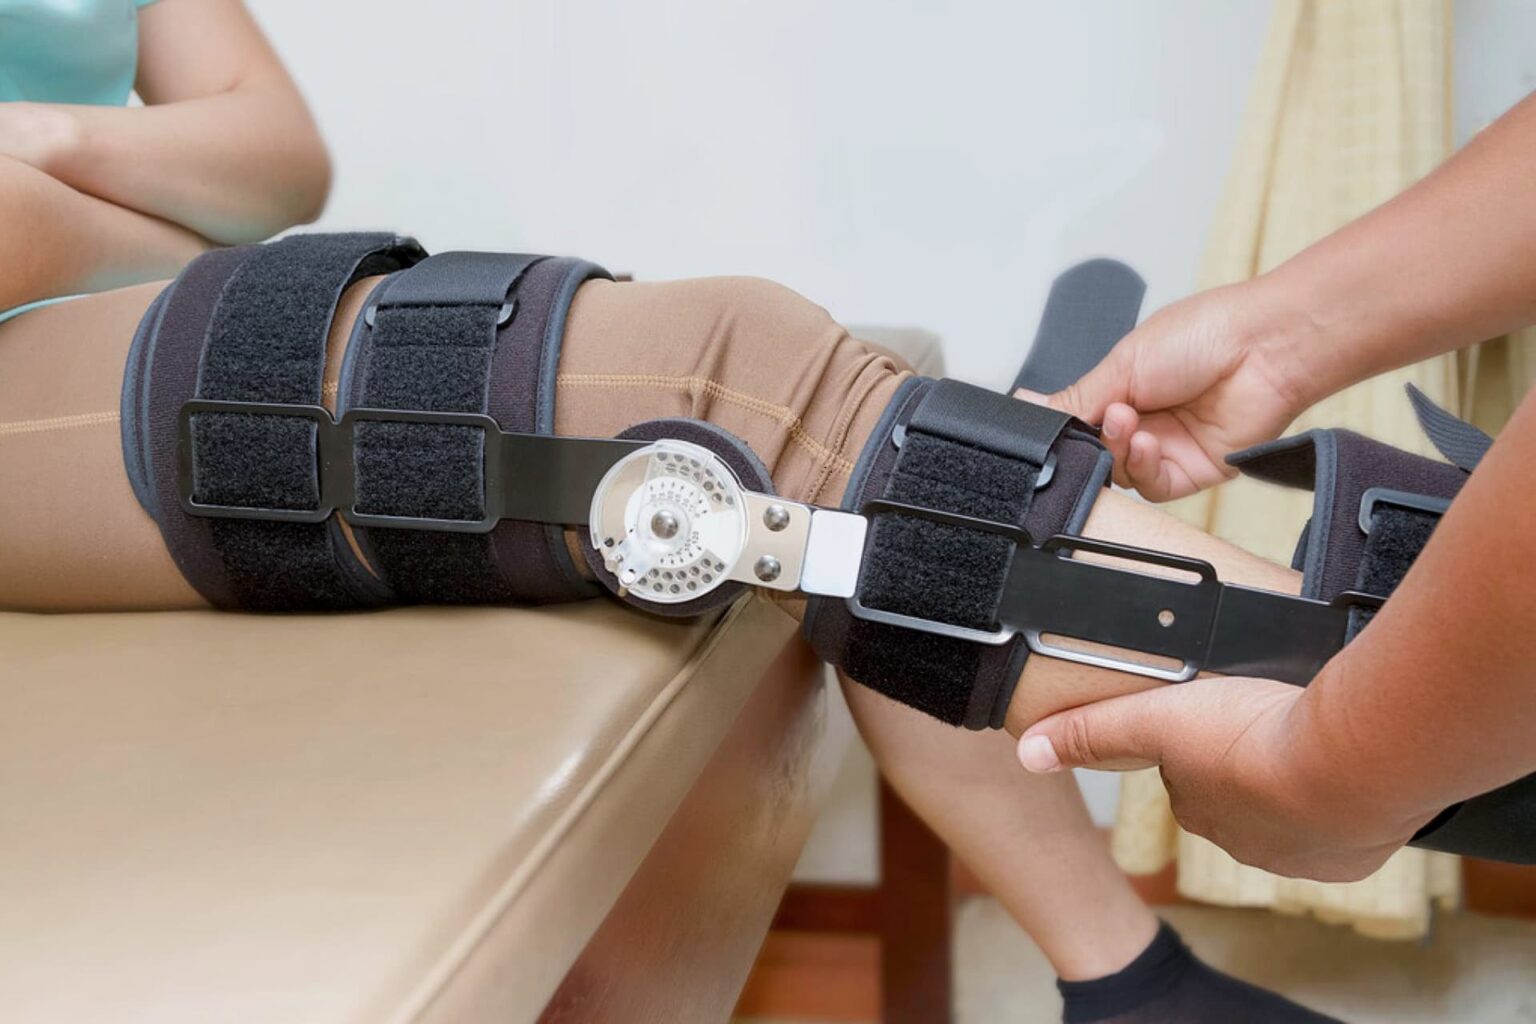 Body Braces for Fractures, Sprains, Spine & Back Injuries